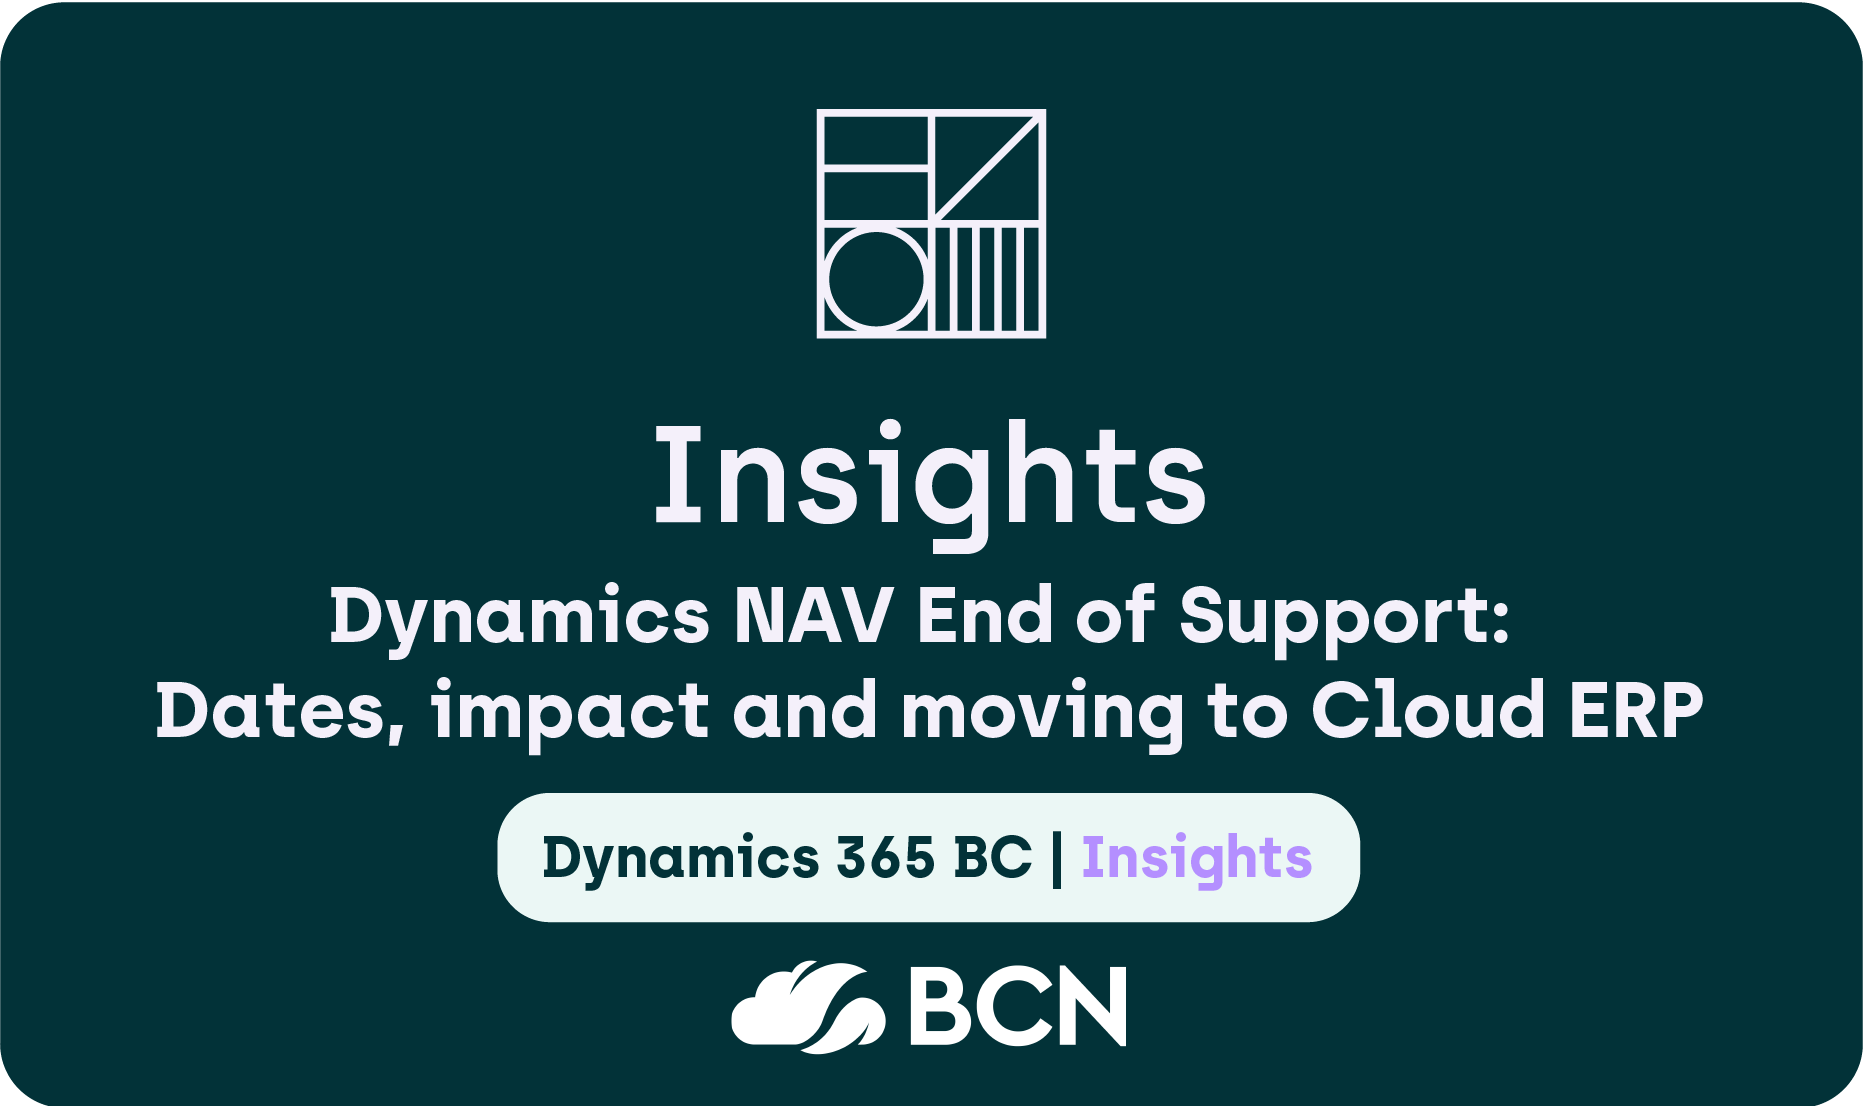 Dynamics NAV End of Support: Dates, impact and moving to Cloud ERP